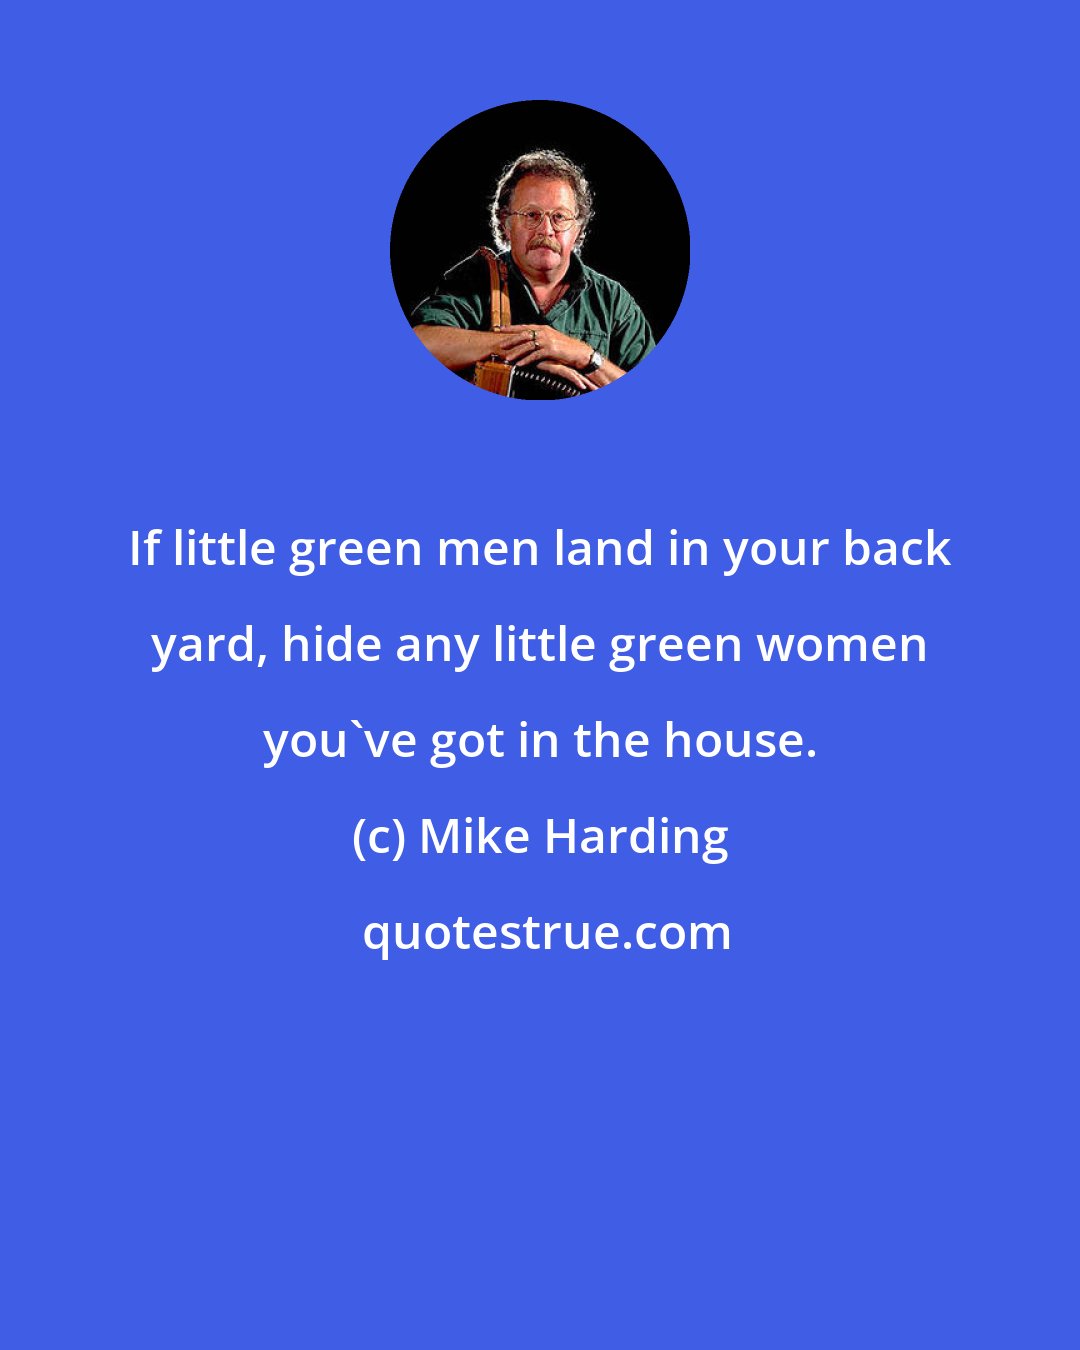 Mike Harding: If little green men land in your back yard, hide any little green women you've got in the house.